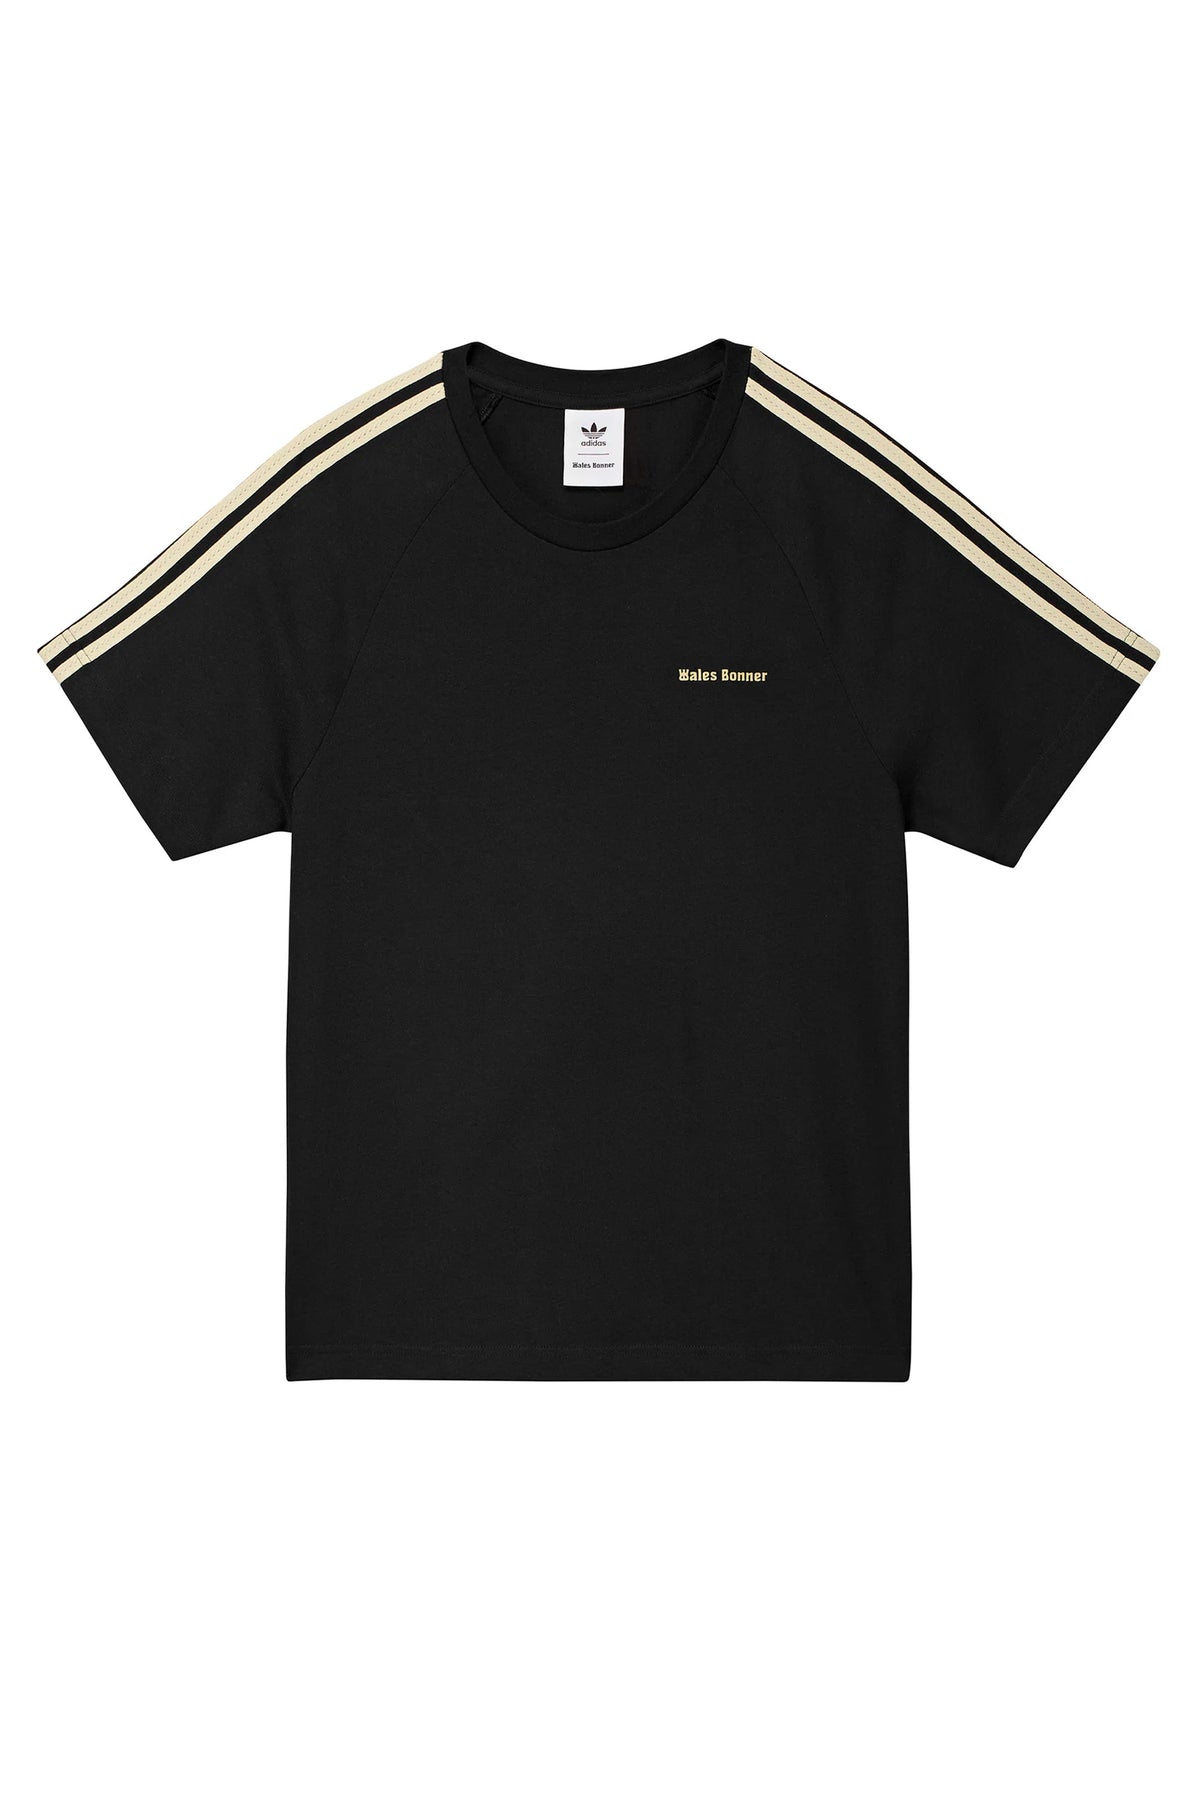 ADIDAS ORIGINALS BY WALES BONNER WB S/S TEE / BLK